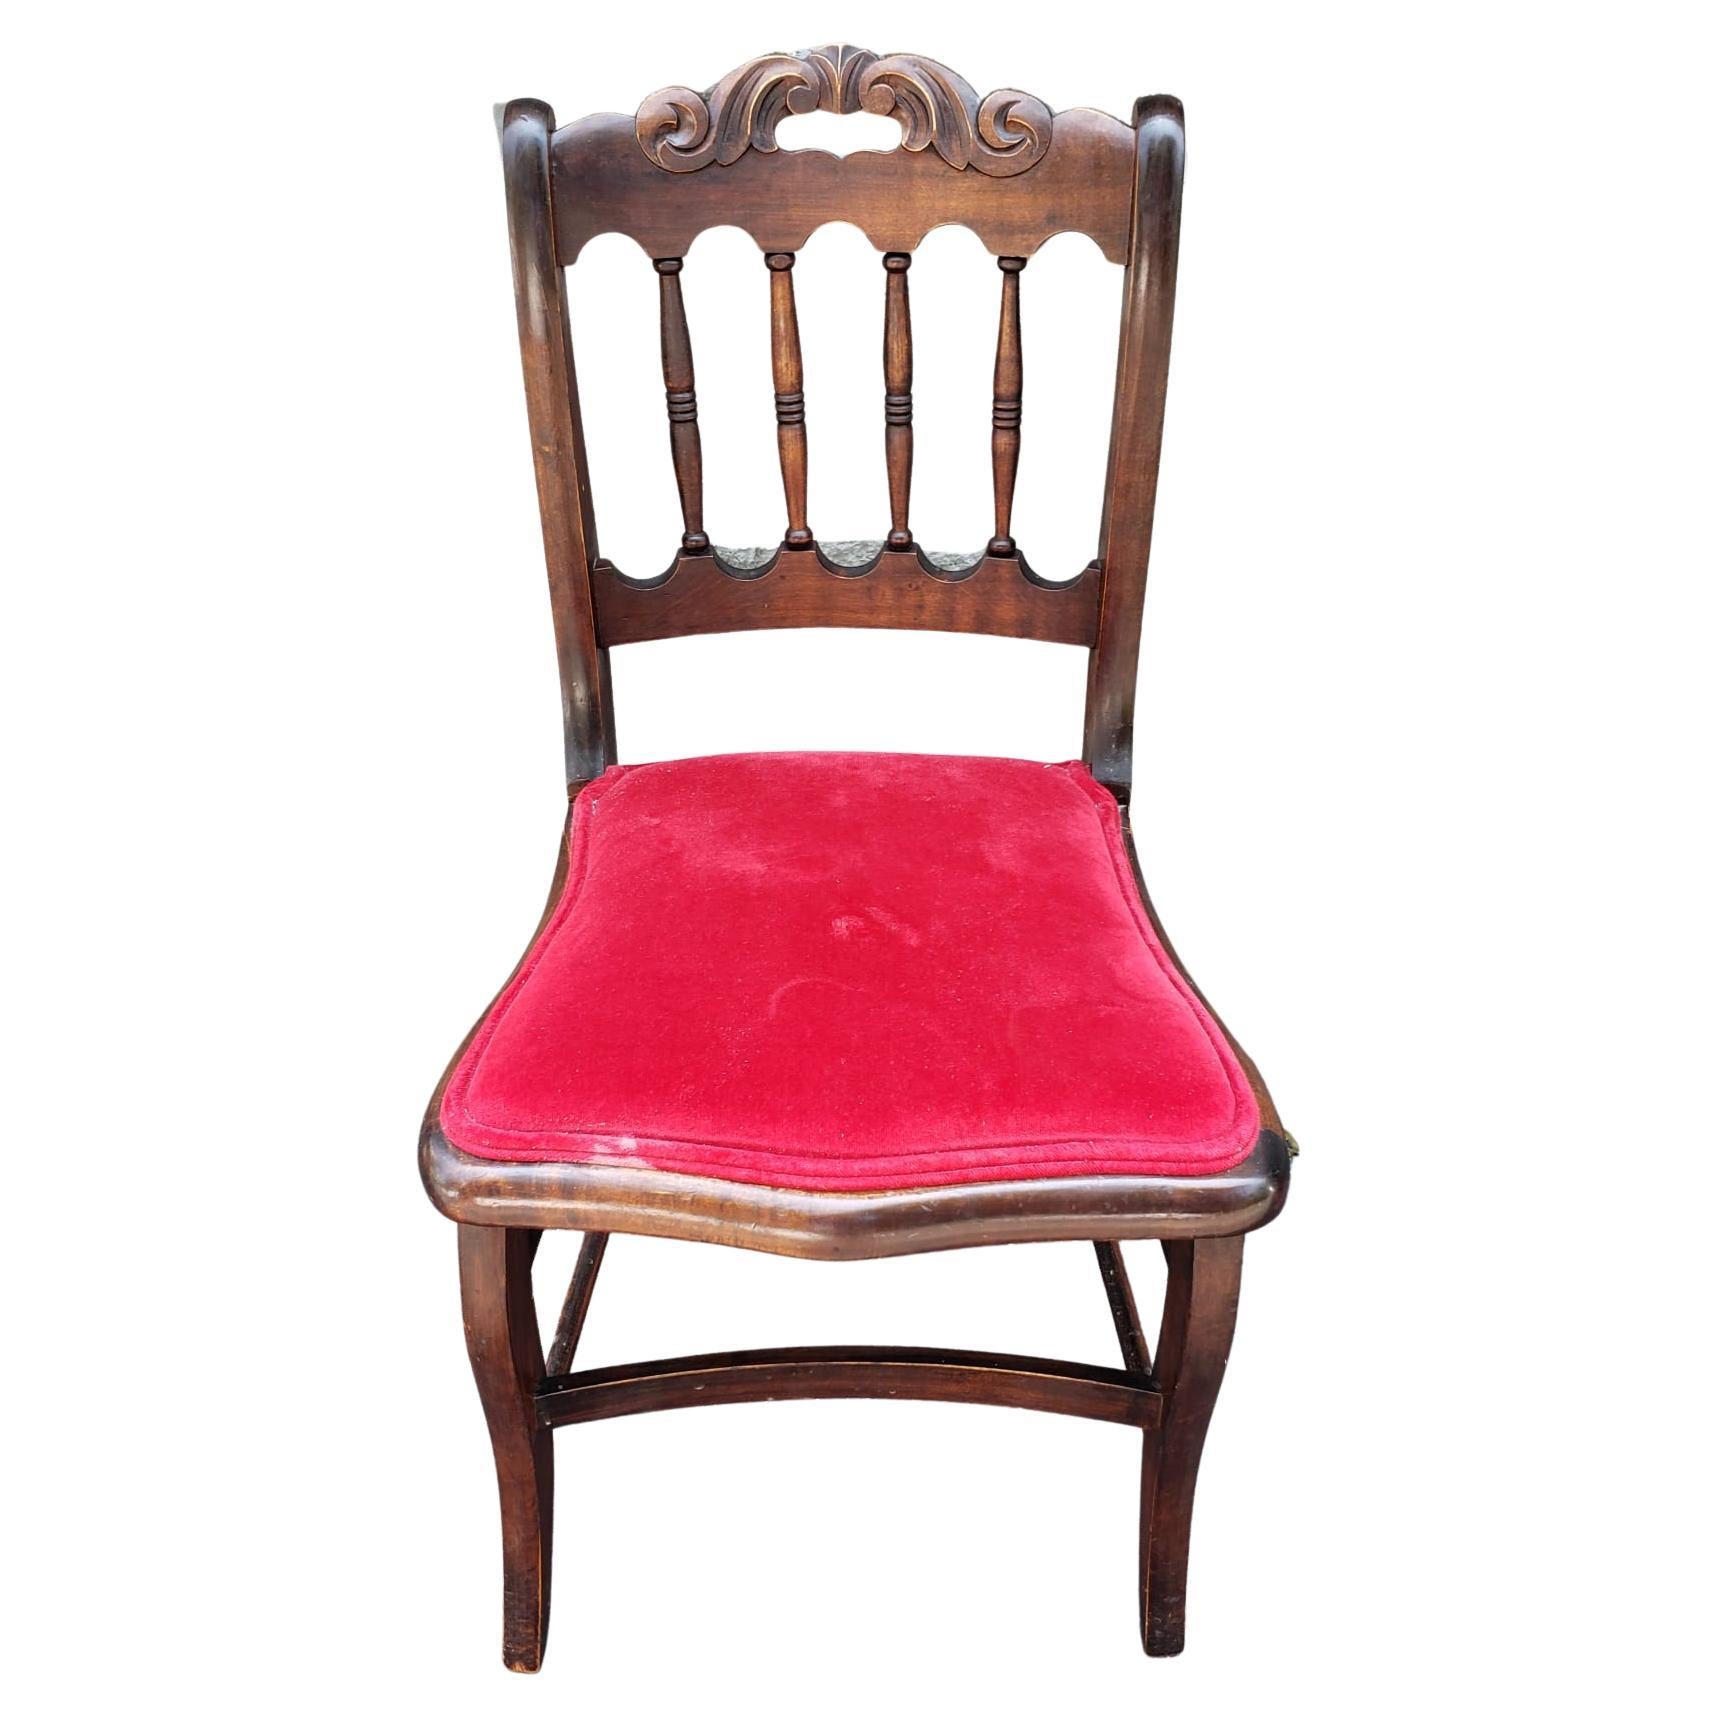 A late Victorian Carved Mahogany and Velvet Upholstered Seat Side Chair in very good antique and sturdy condition. Velvet upholstery in good condition. Measures 17